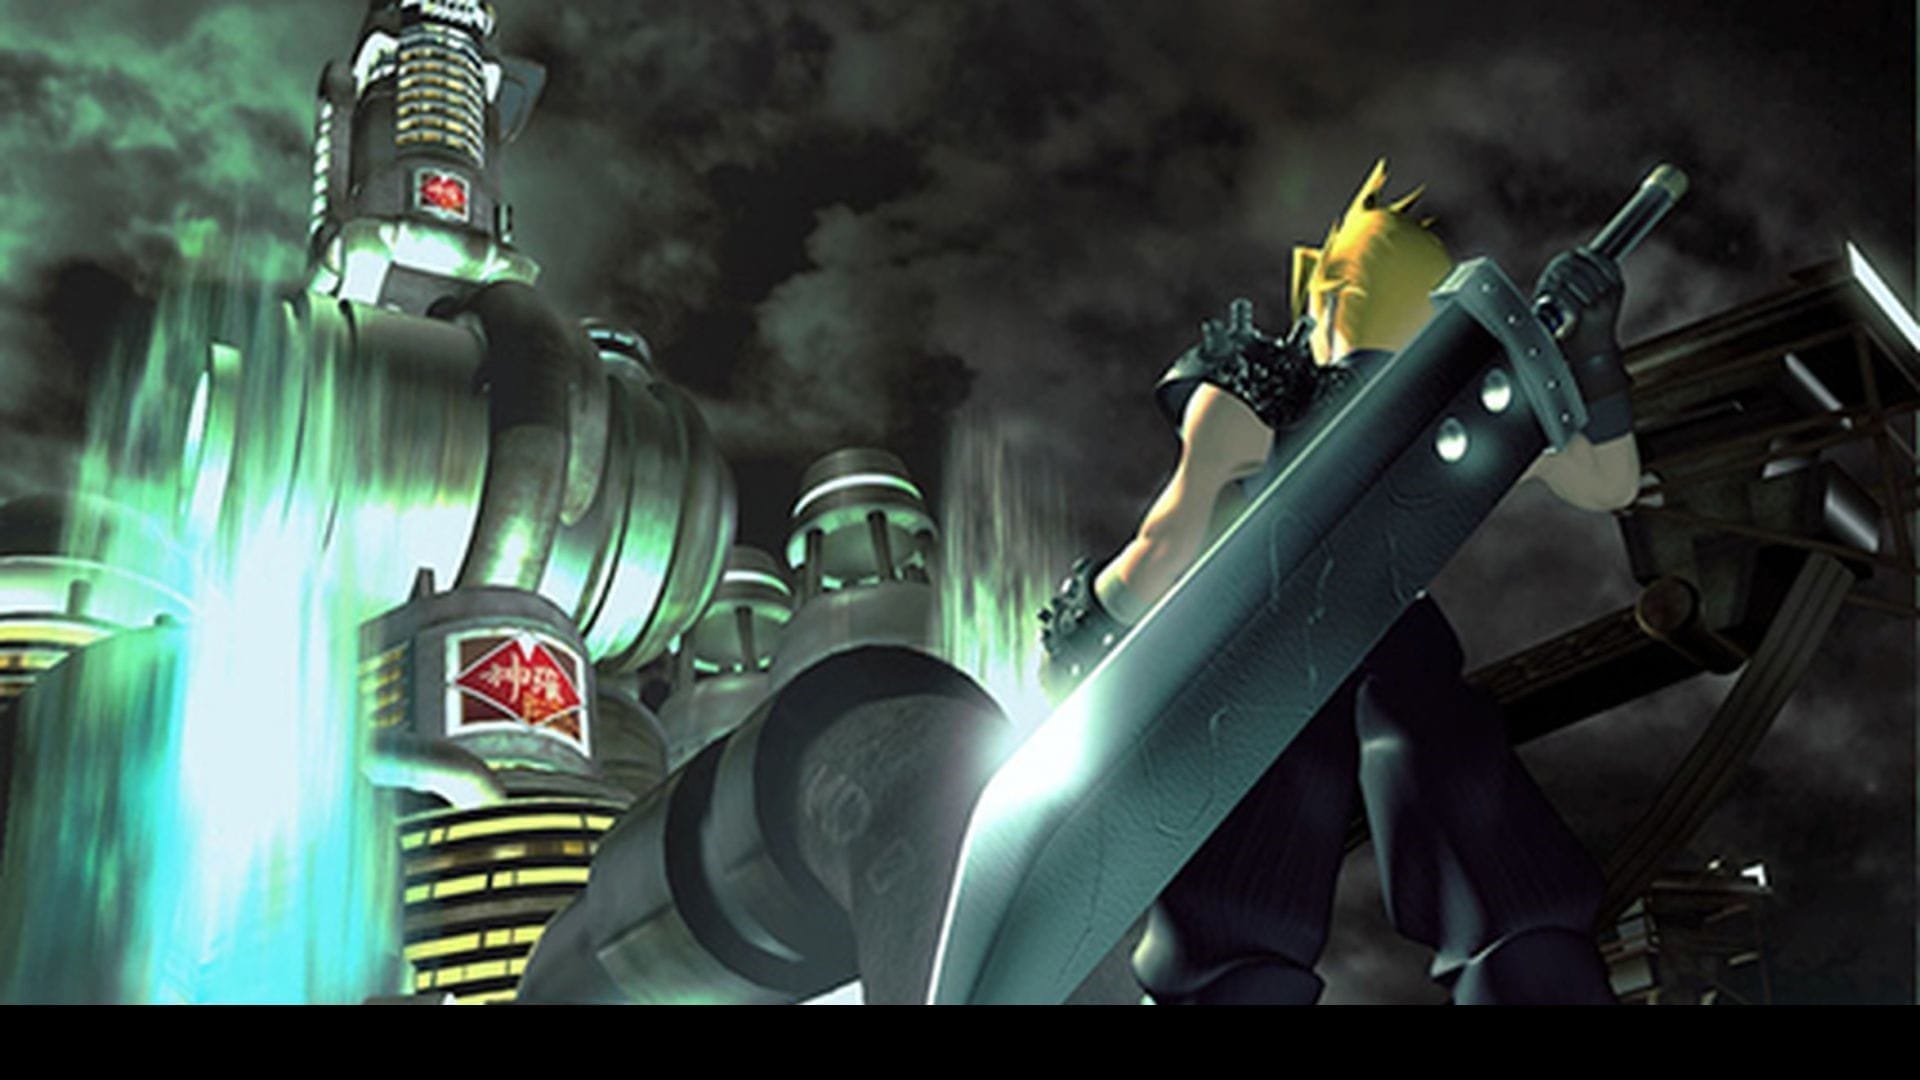 Final Fantasy 7 Remake review: The most daring Final Fantasy ever - CNET